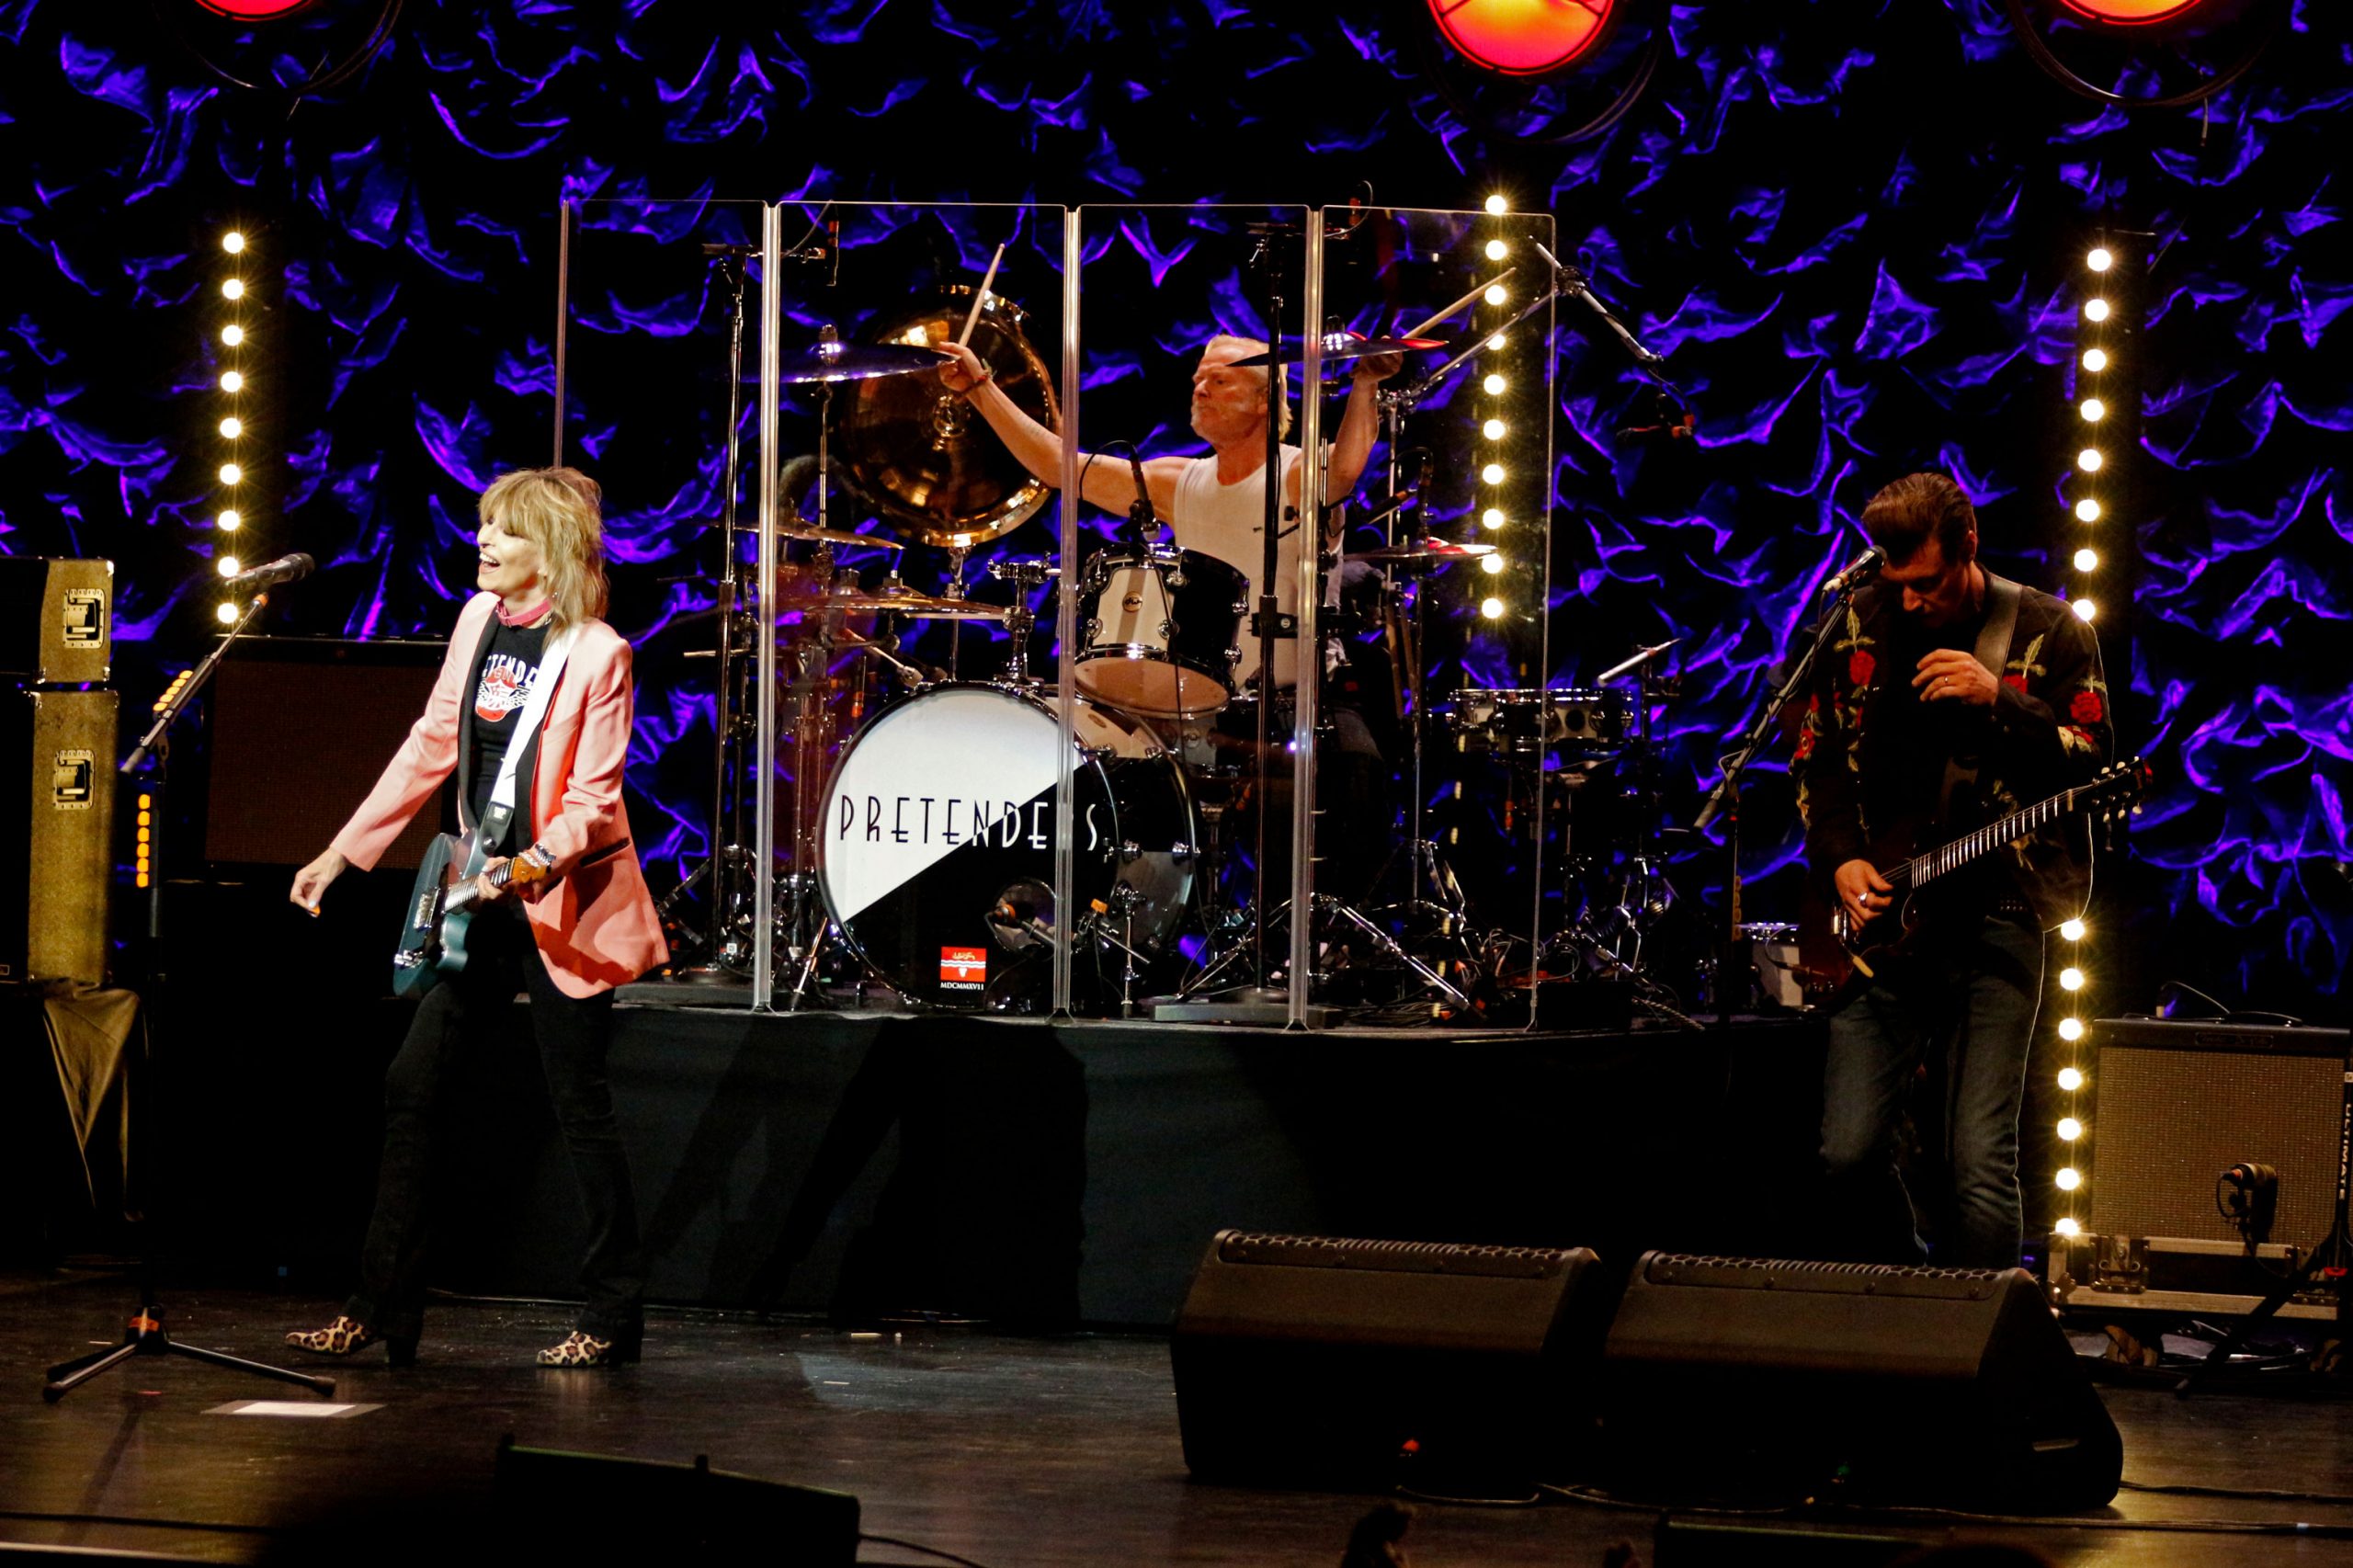 The Pretenders perform at The Peace Center in Greenville, SC